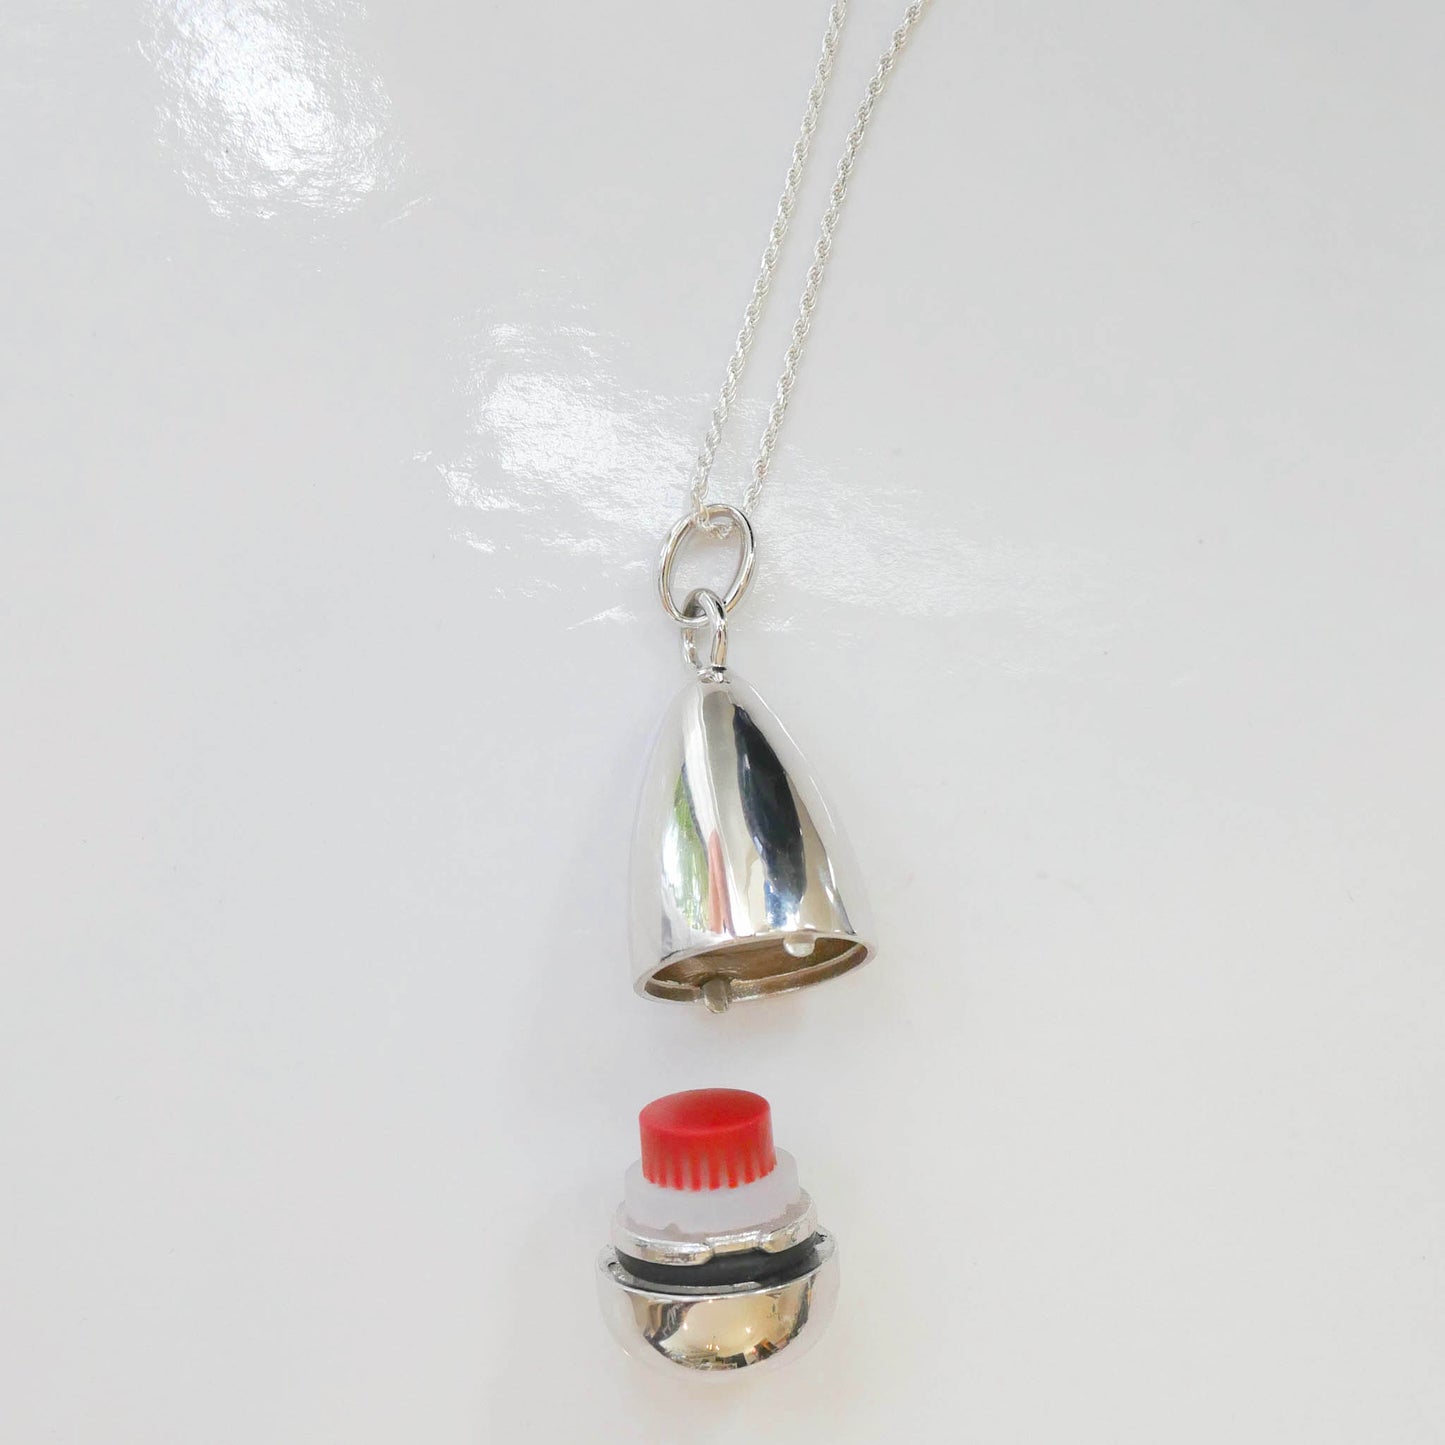 LiLu Lip Balm Necklace Camille Sterling Silver with 8 Lip Balm Refills or DIY Refills - Use Your Balm